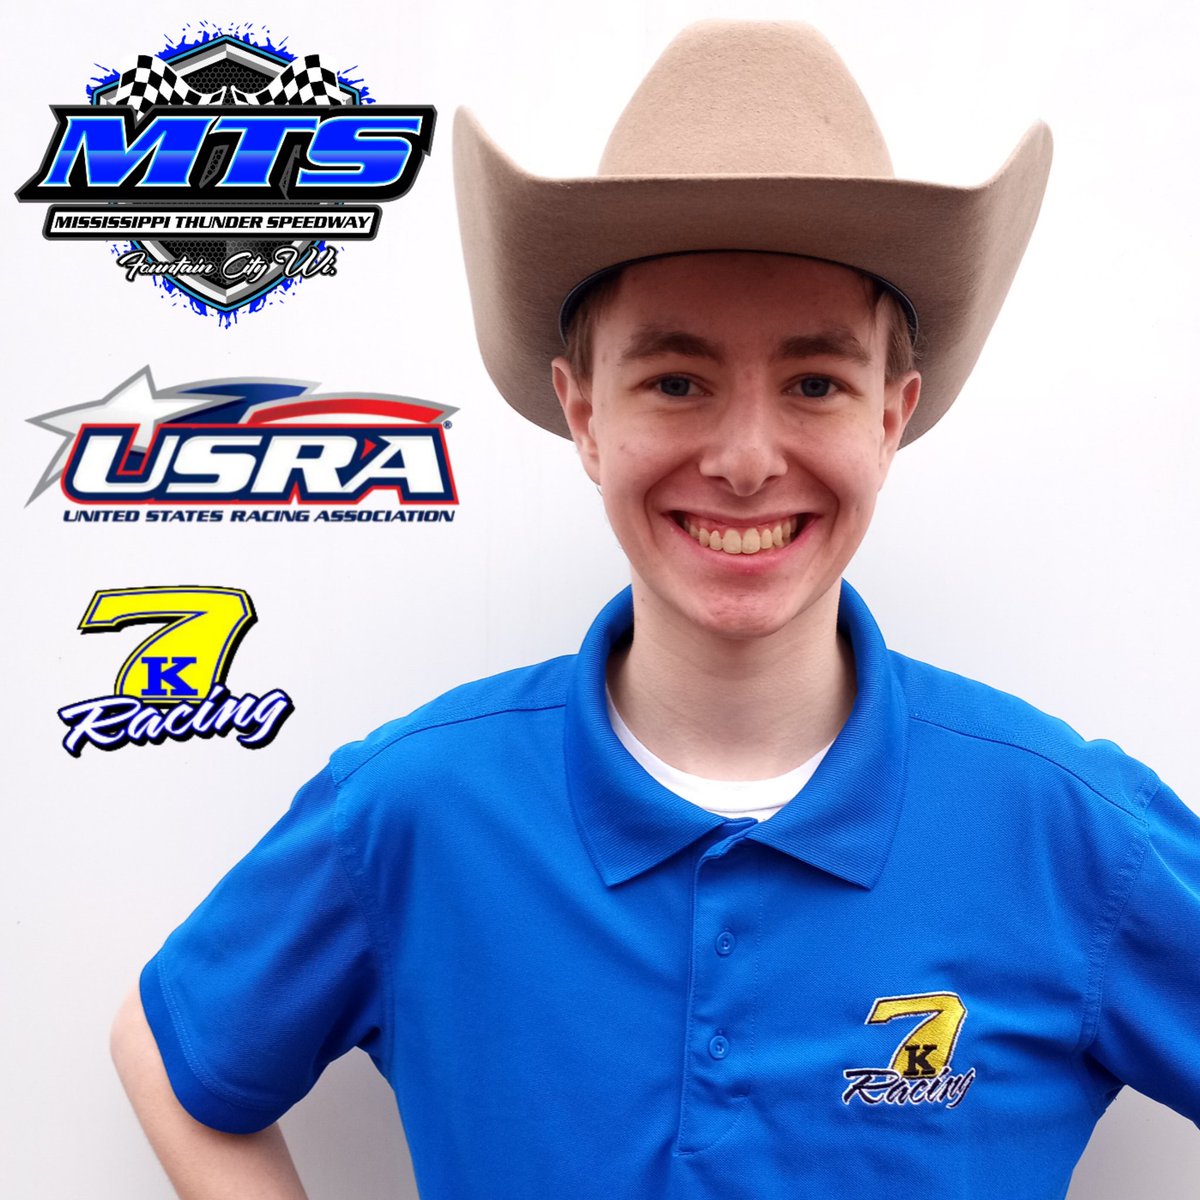 7K Racing is excited to announce that our Teddy Kottschade will kickoff his Modified career at @ThunderAtMTS. Initially we planned on @WissotaRacing with all the tracks so close to home but with the required changes needed, we decided to leave the car as @USRAracing for now to…